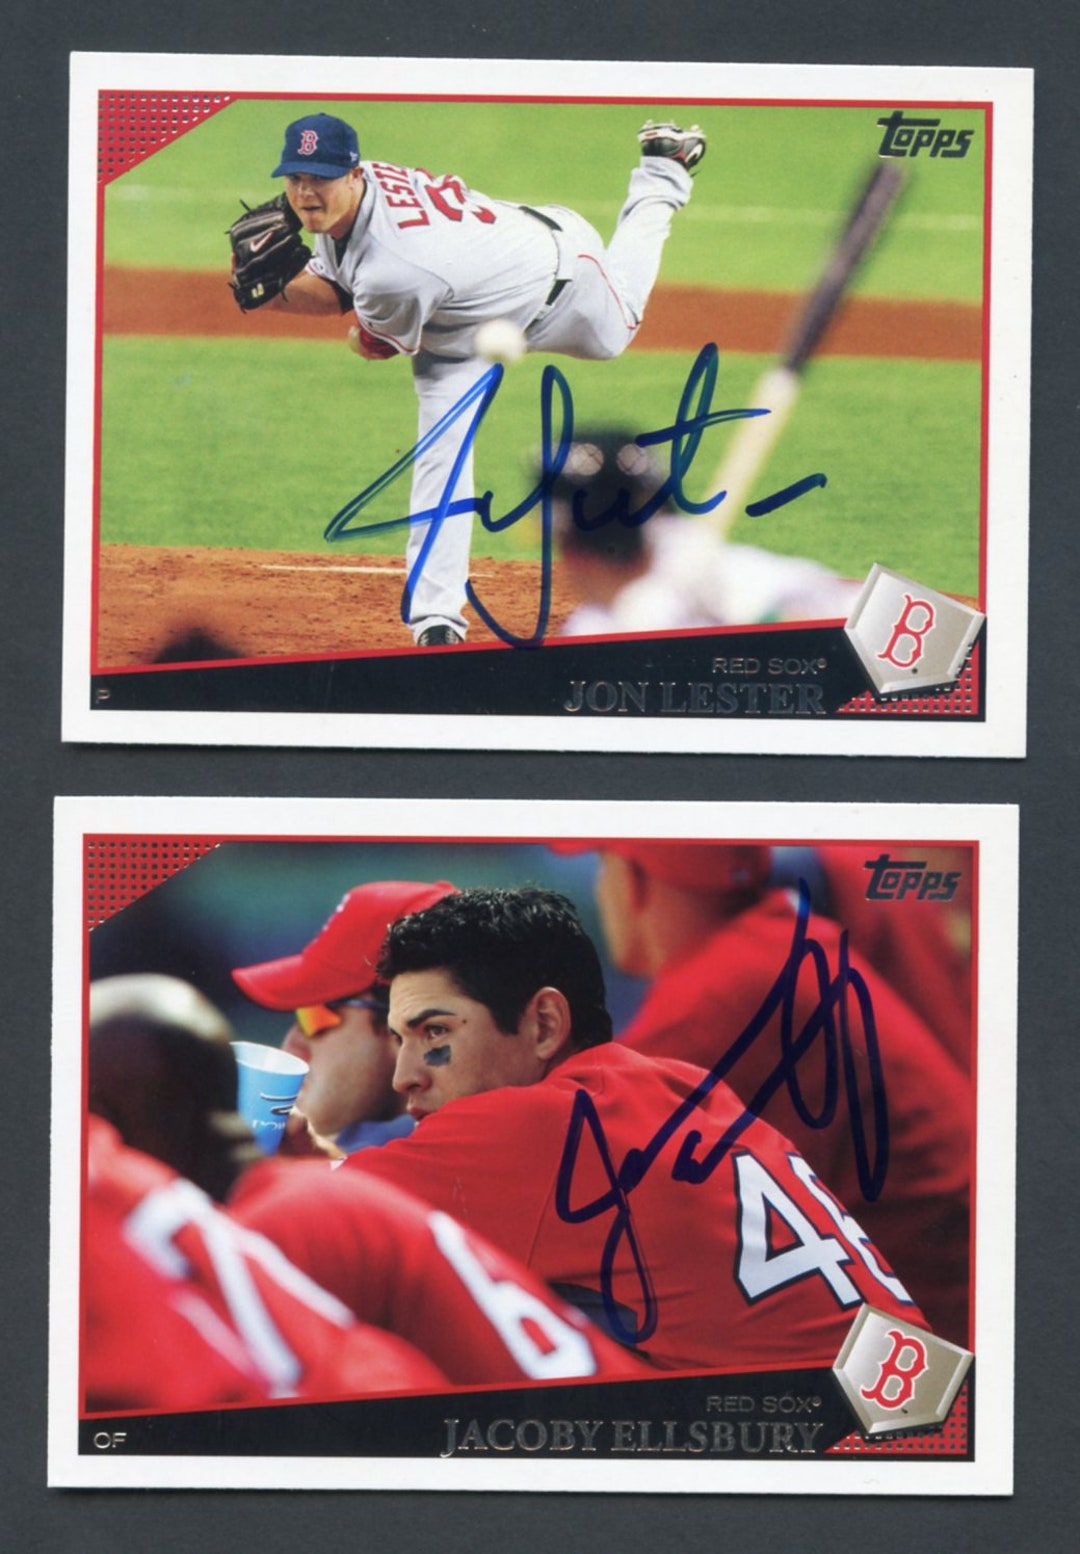 Autographed 2009 Topps Boston Red Sox Cards: Jacoby Ellsbury & 